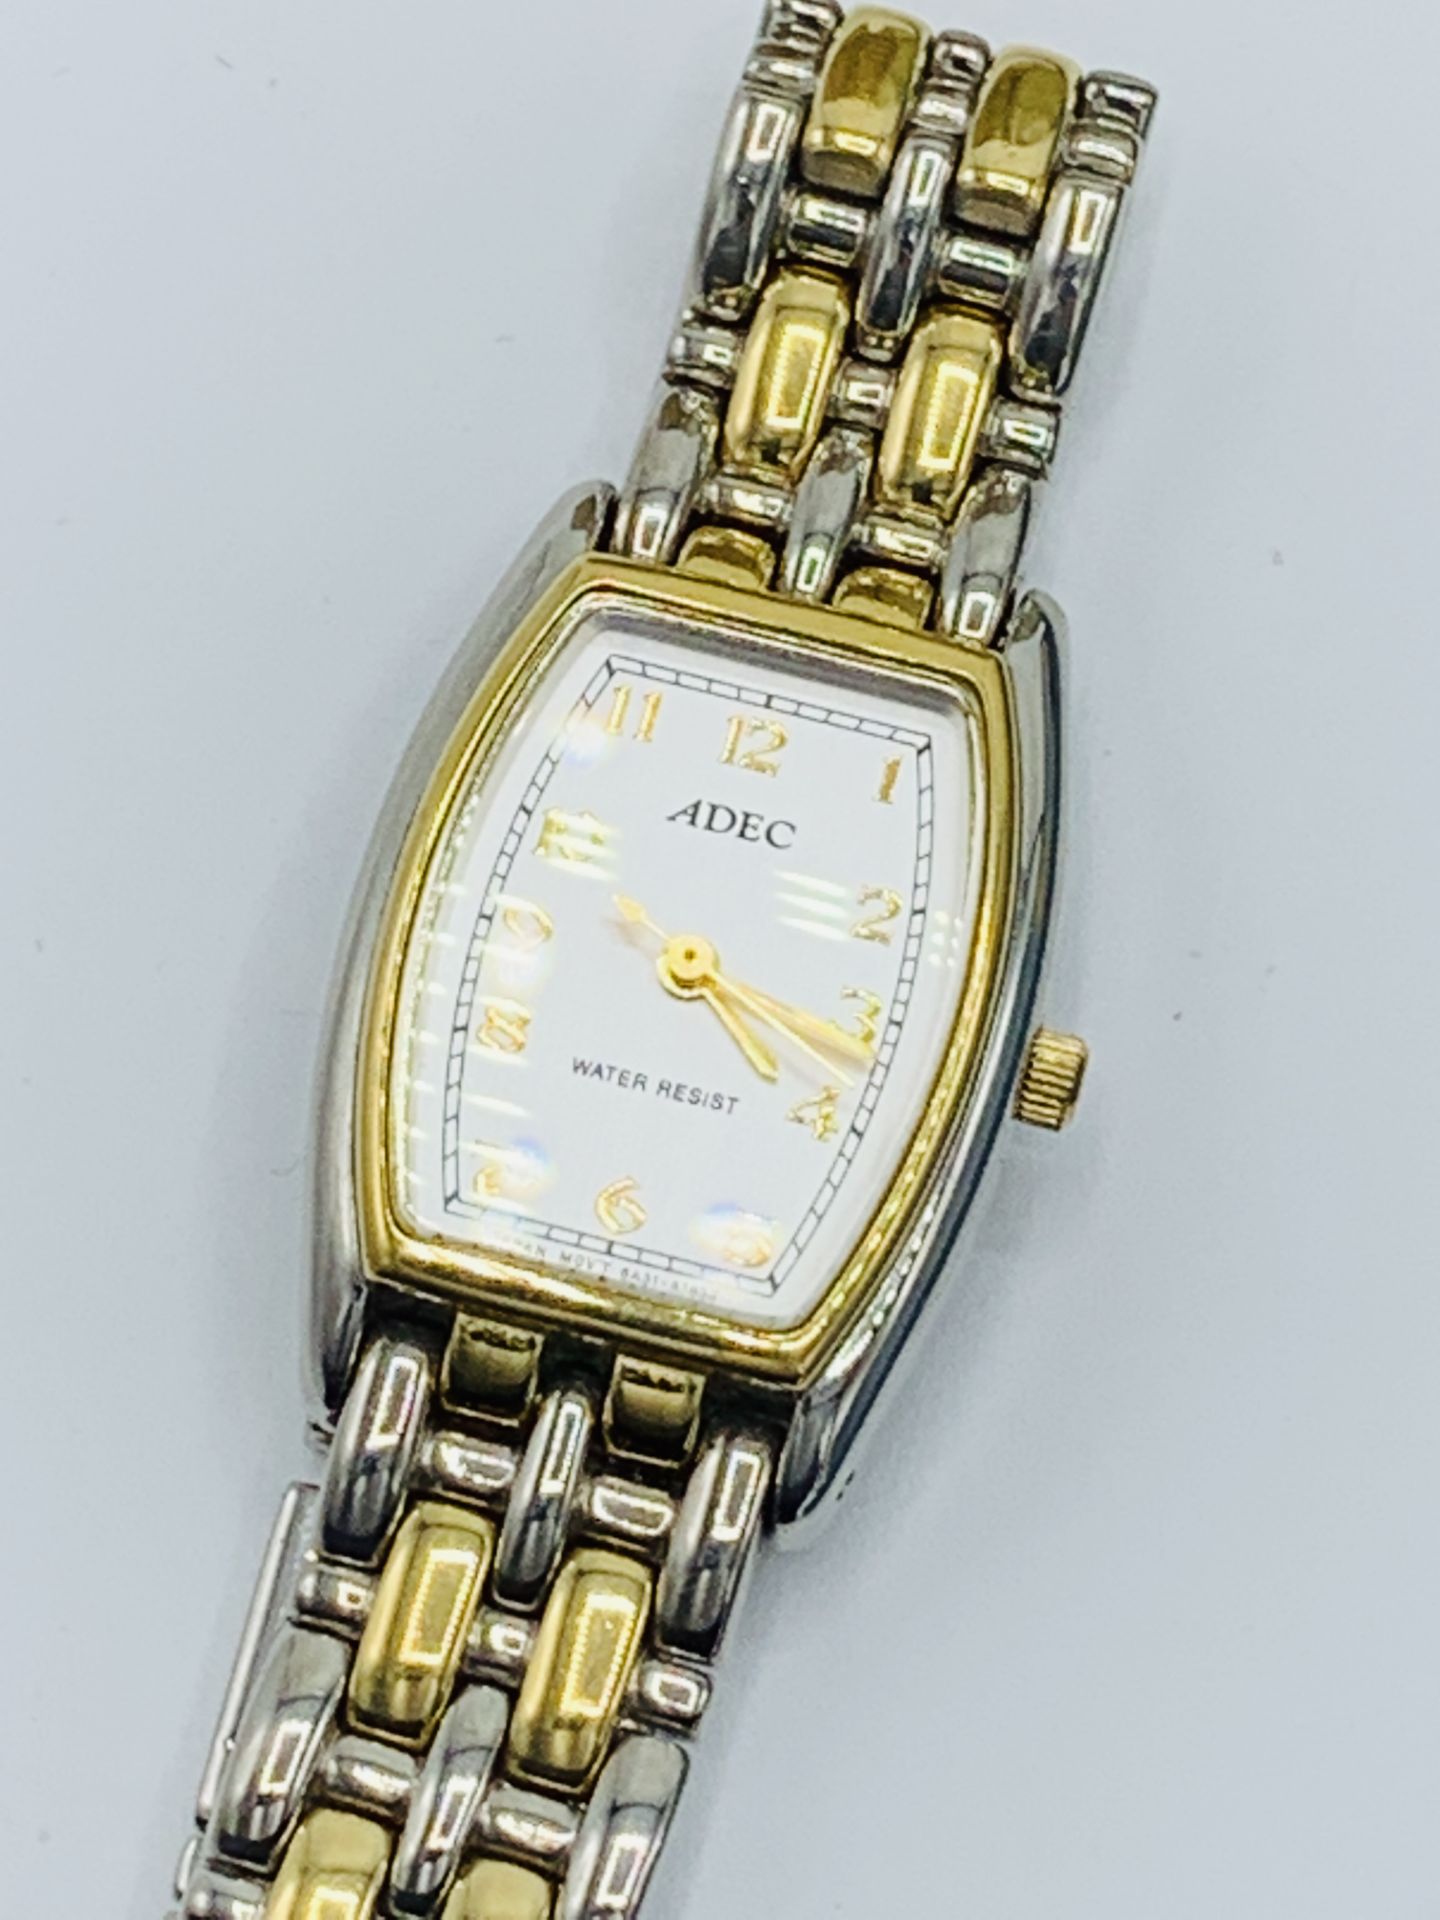 A collection of wrist watches - Image 5 of 7